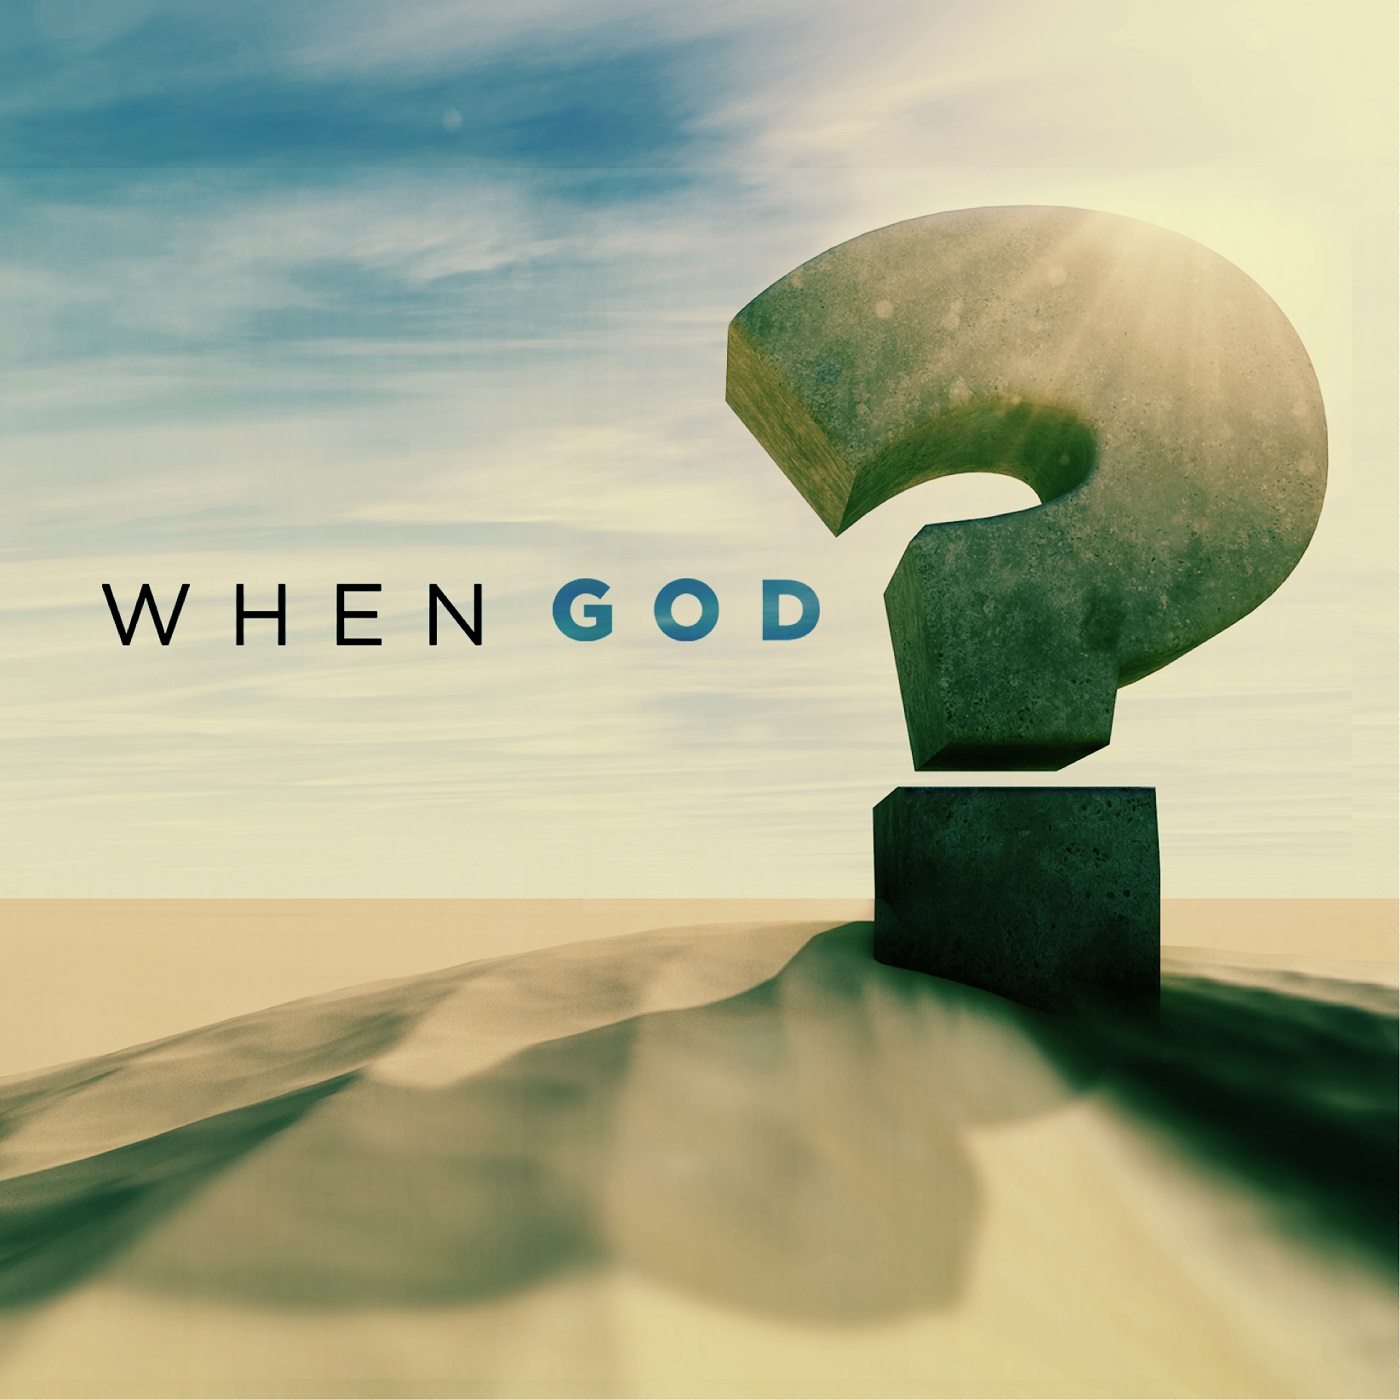 When God?: When God Is Uncooperative